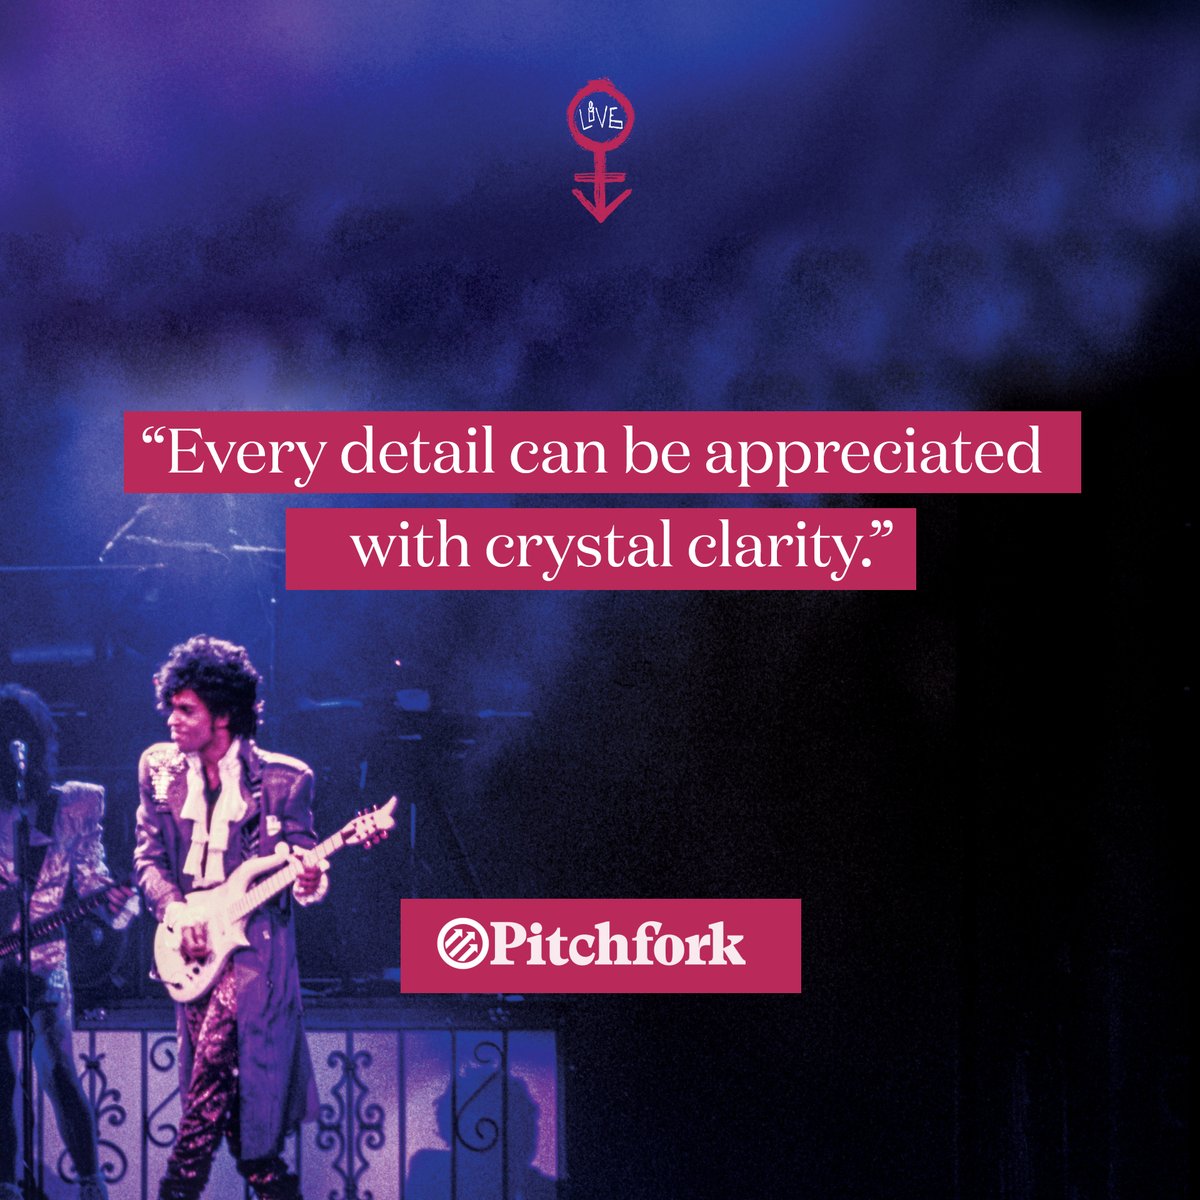 Prince and The Revolution: Live has been named Best New Reissue by @pitchfork. Now that the recently discovered source tapes from Prince's Paisley Park vault have been remastered, they write that 'every detail can be appreciated with crystal clarity.' pitchfork.com/reviews/albums…